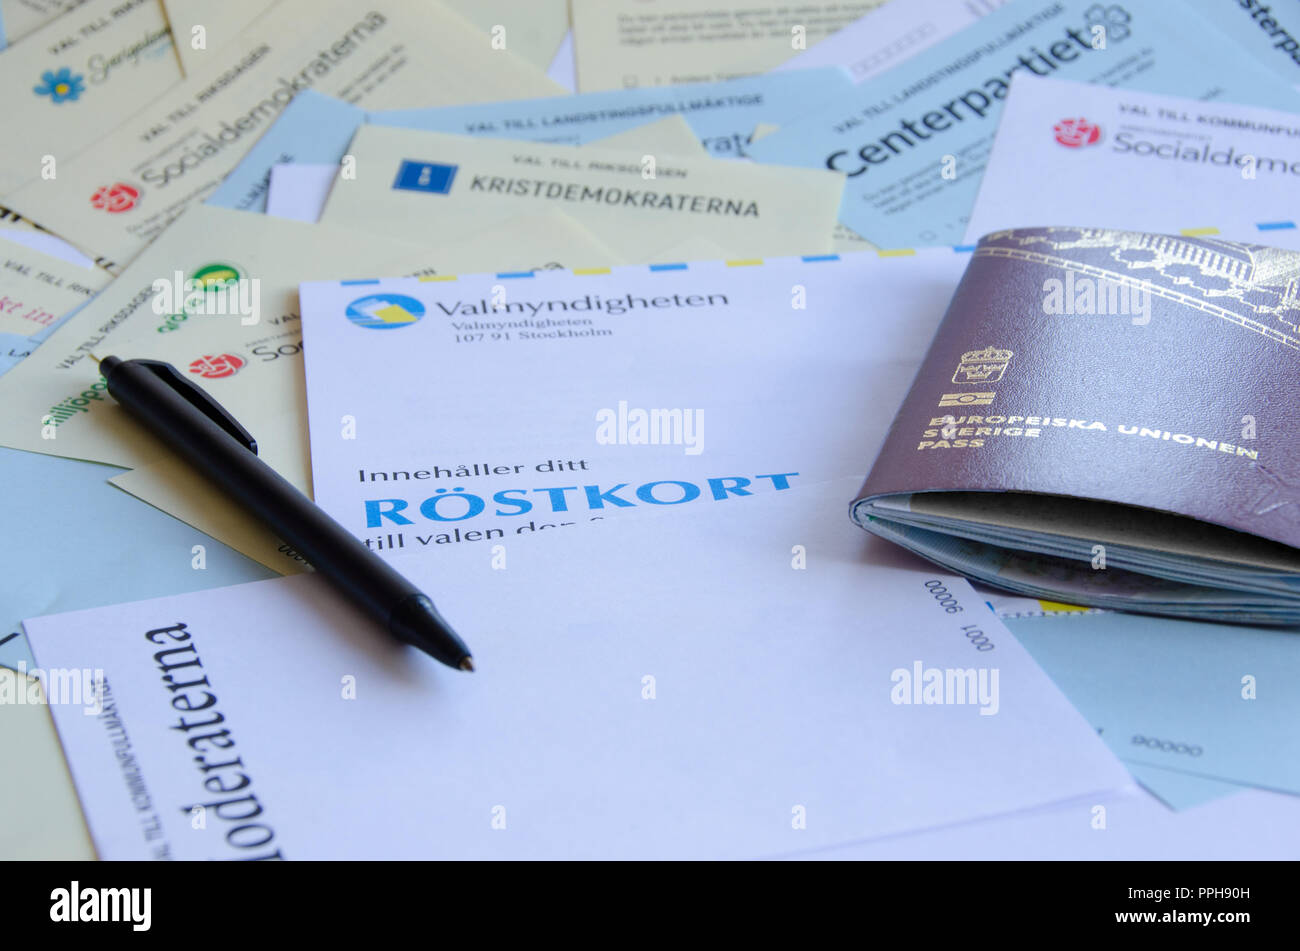 Stockholm, Sweden - 5 september 2018. Swedish election papers and passport Stock Photo